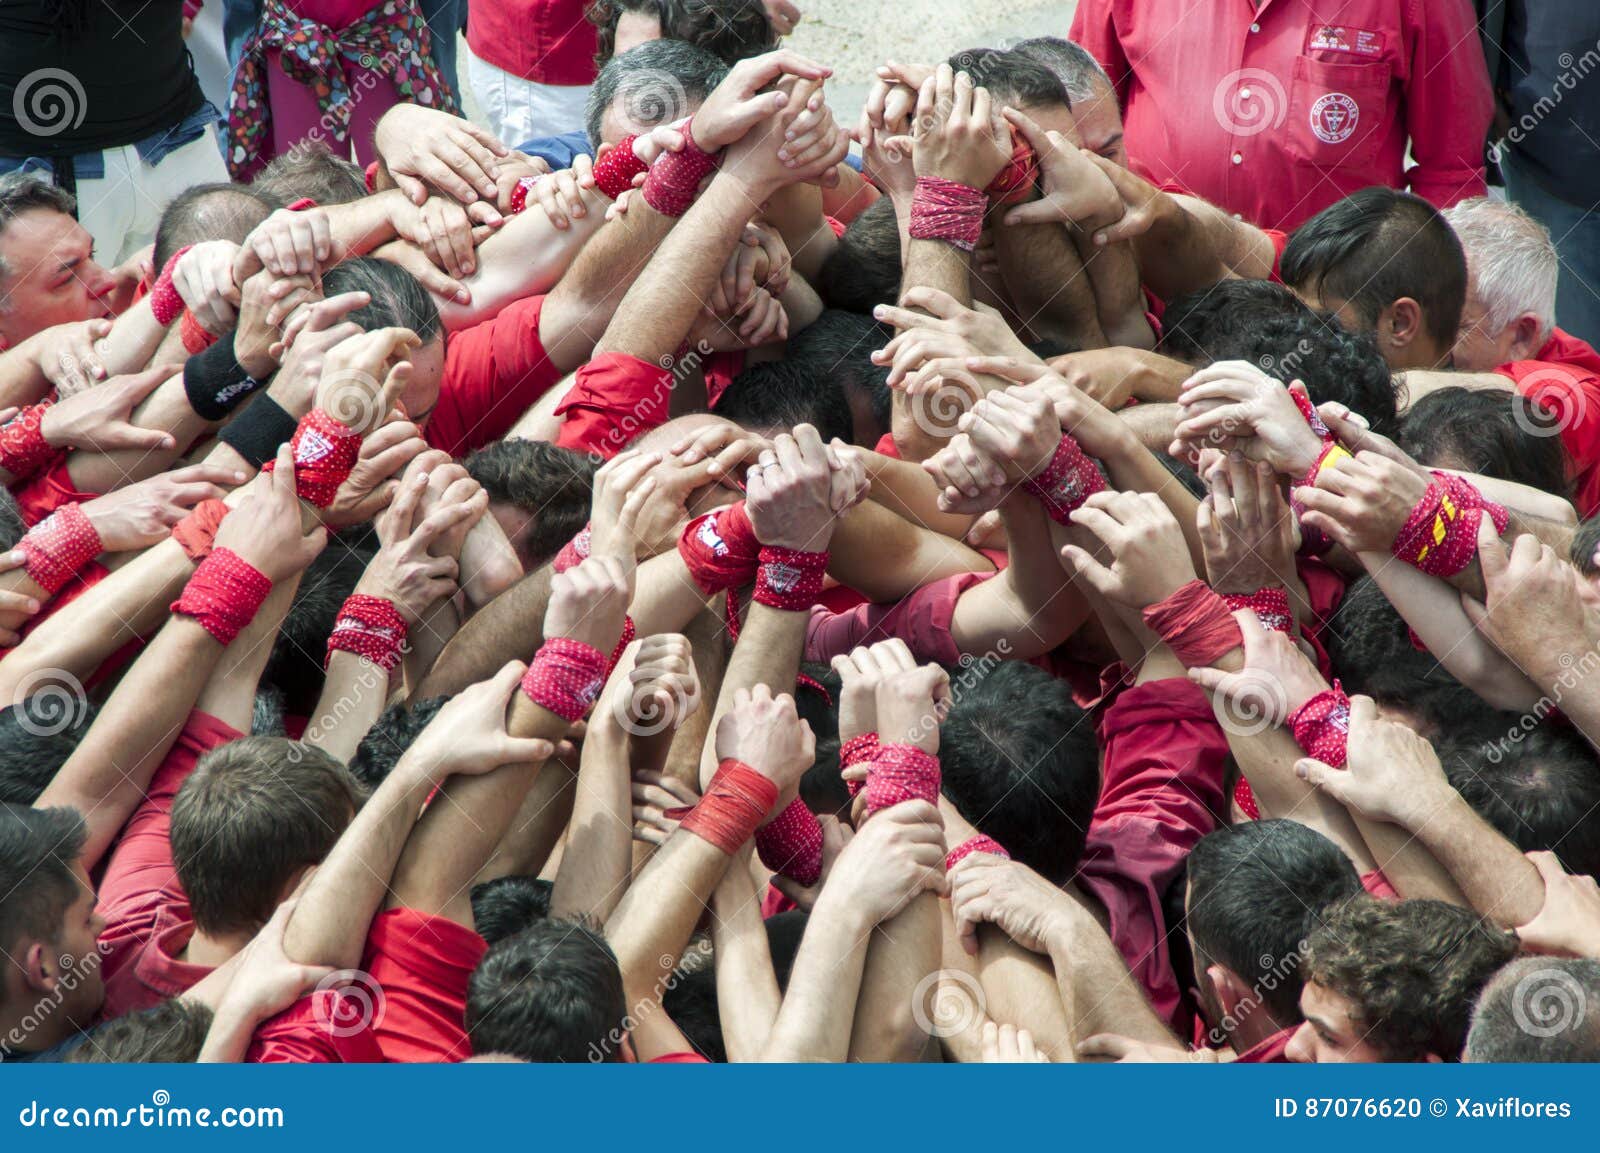 Building Castells or Human Towers Image - of succes, effort: 87076620